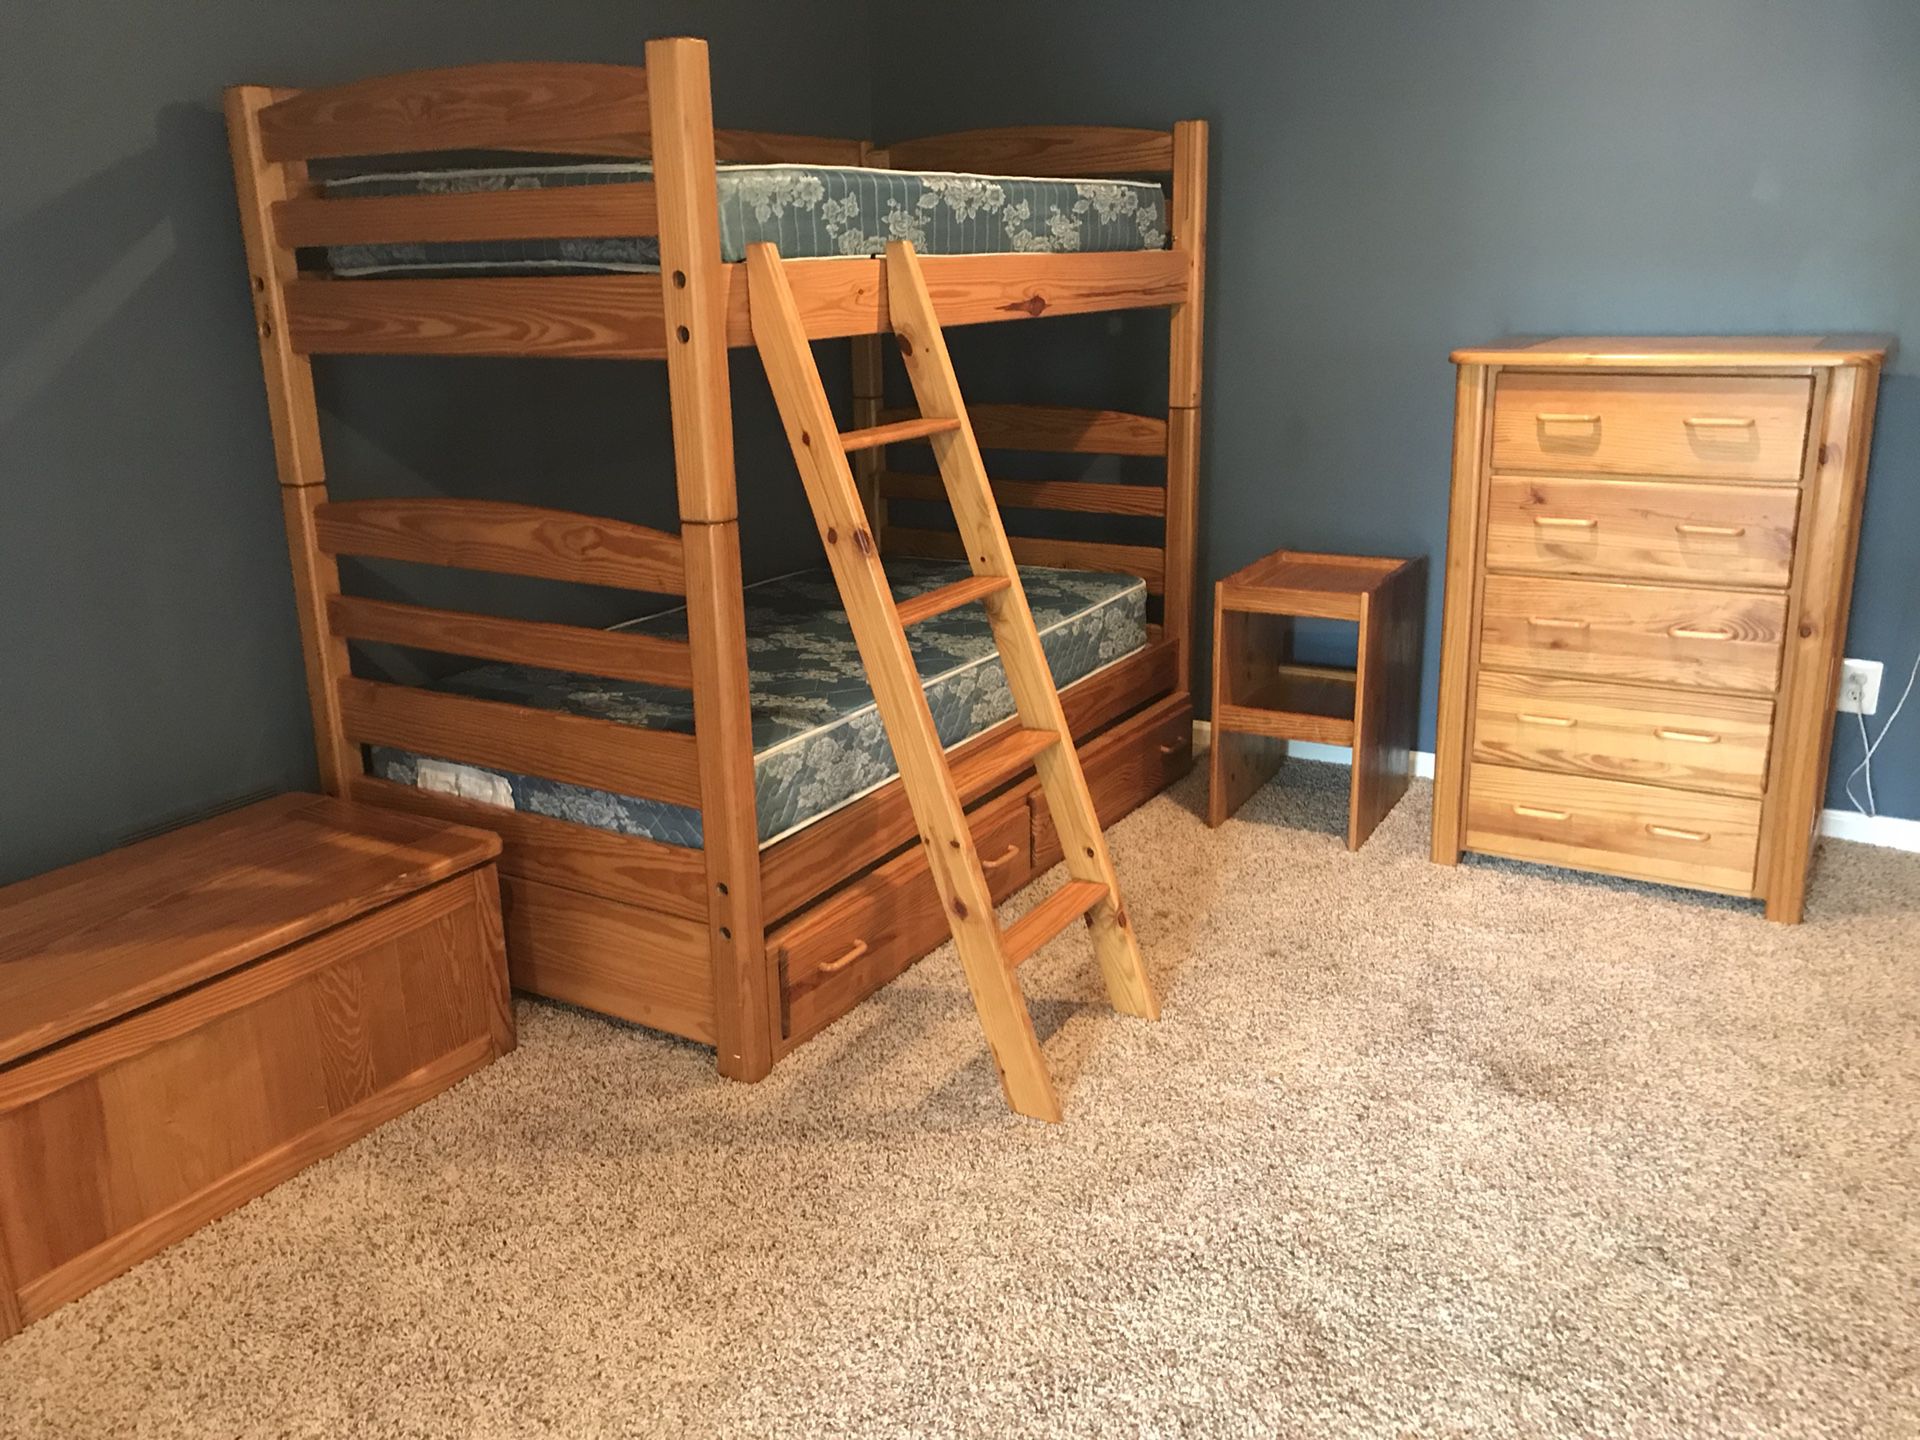 This End Up Kids Bedroom Furniture For, This End Up Bunk Beds